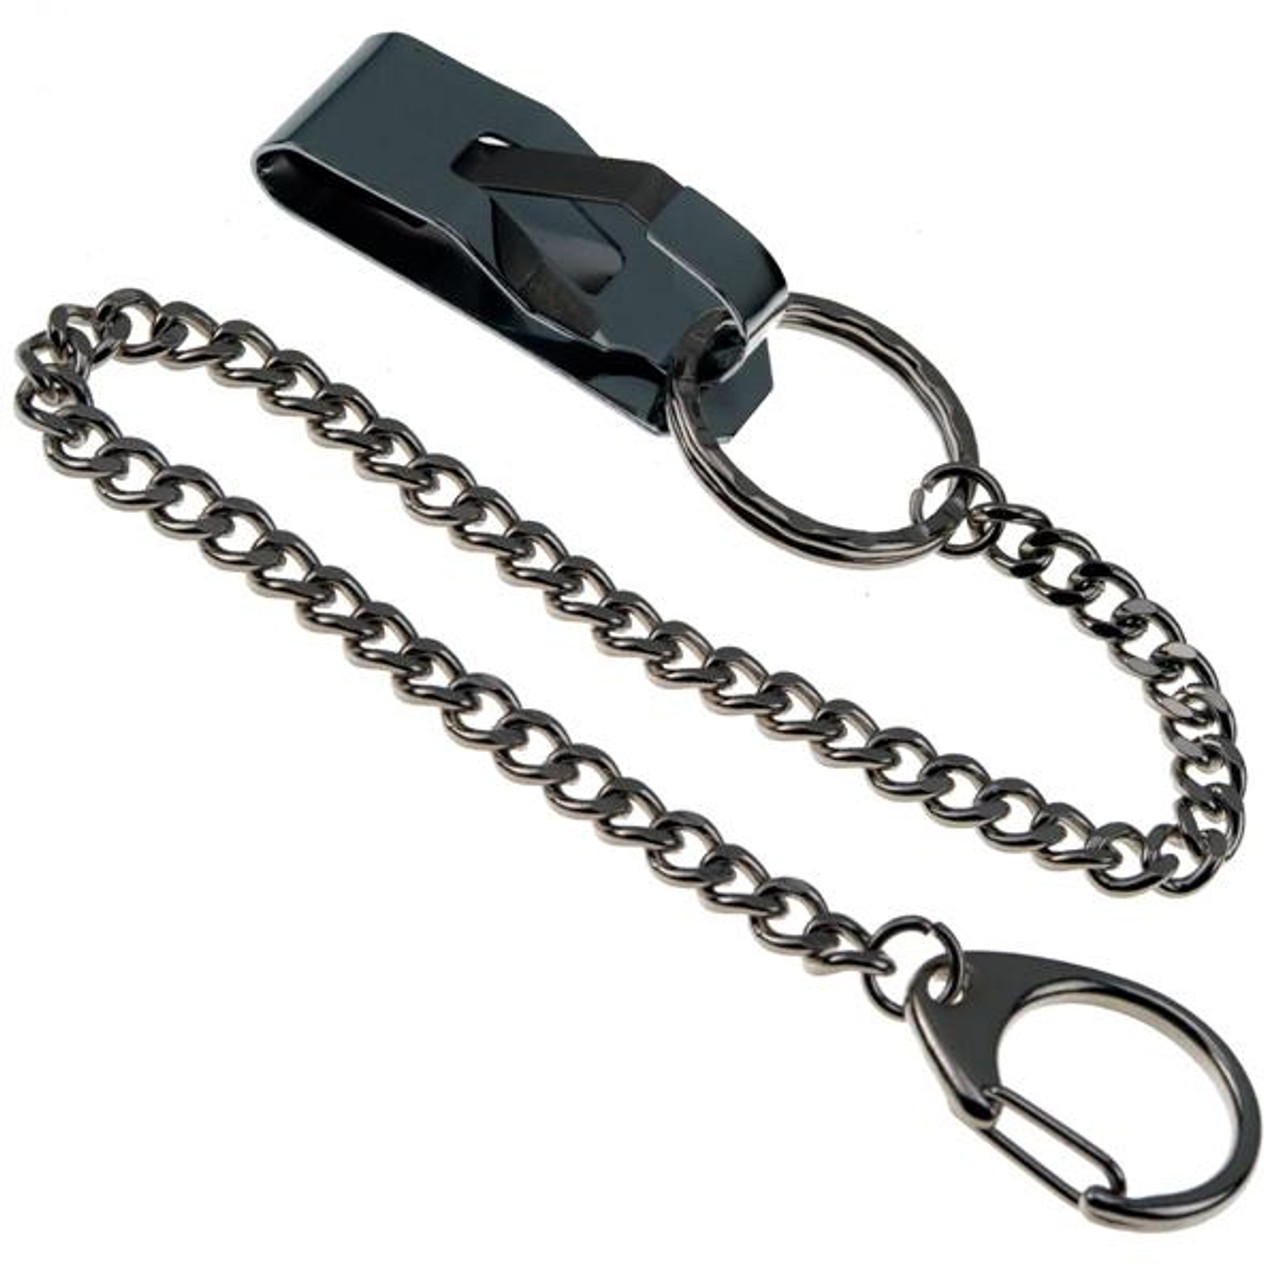 Amazon.co.jp: [Pack of 2] Stainless Steel Key Ring Security Belt Clip Key  Chain Sports Pants Clothing Pocket Belt Simple Elegant Durable Multi Ring  Keychain Convenient Key Holder : Clothing, Shoes & Jewelry